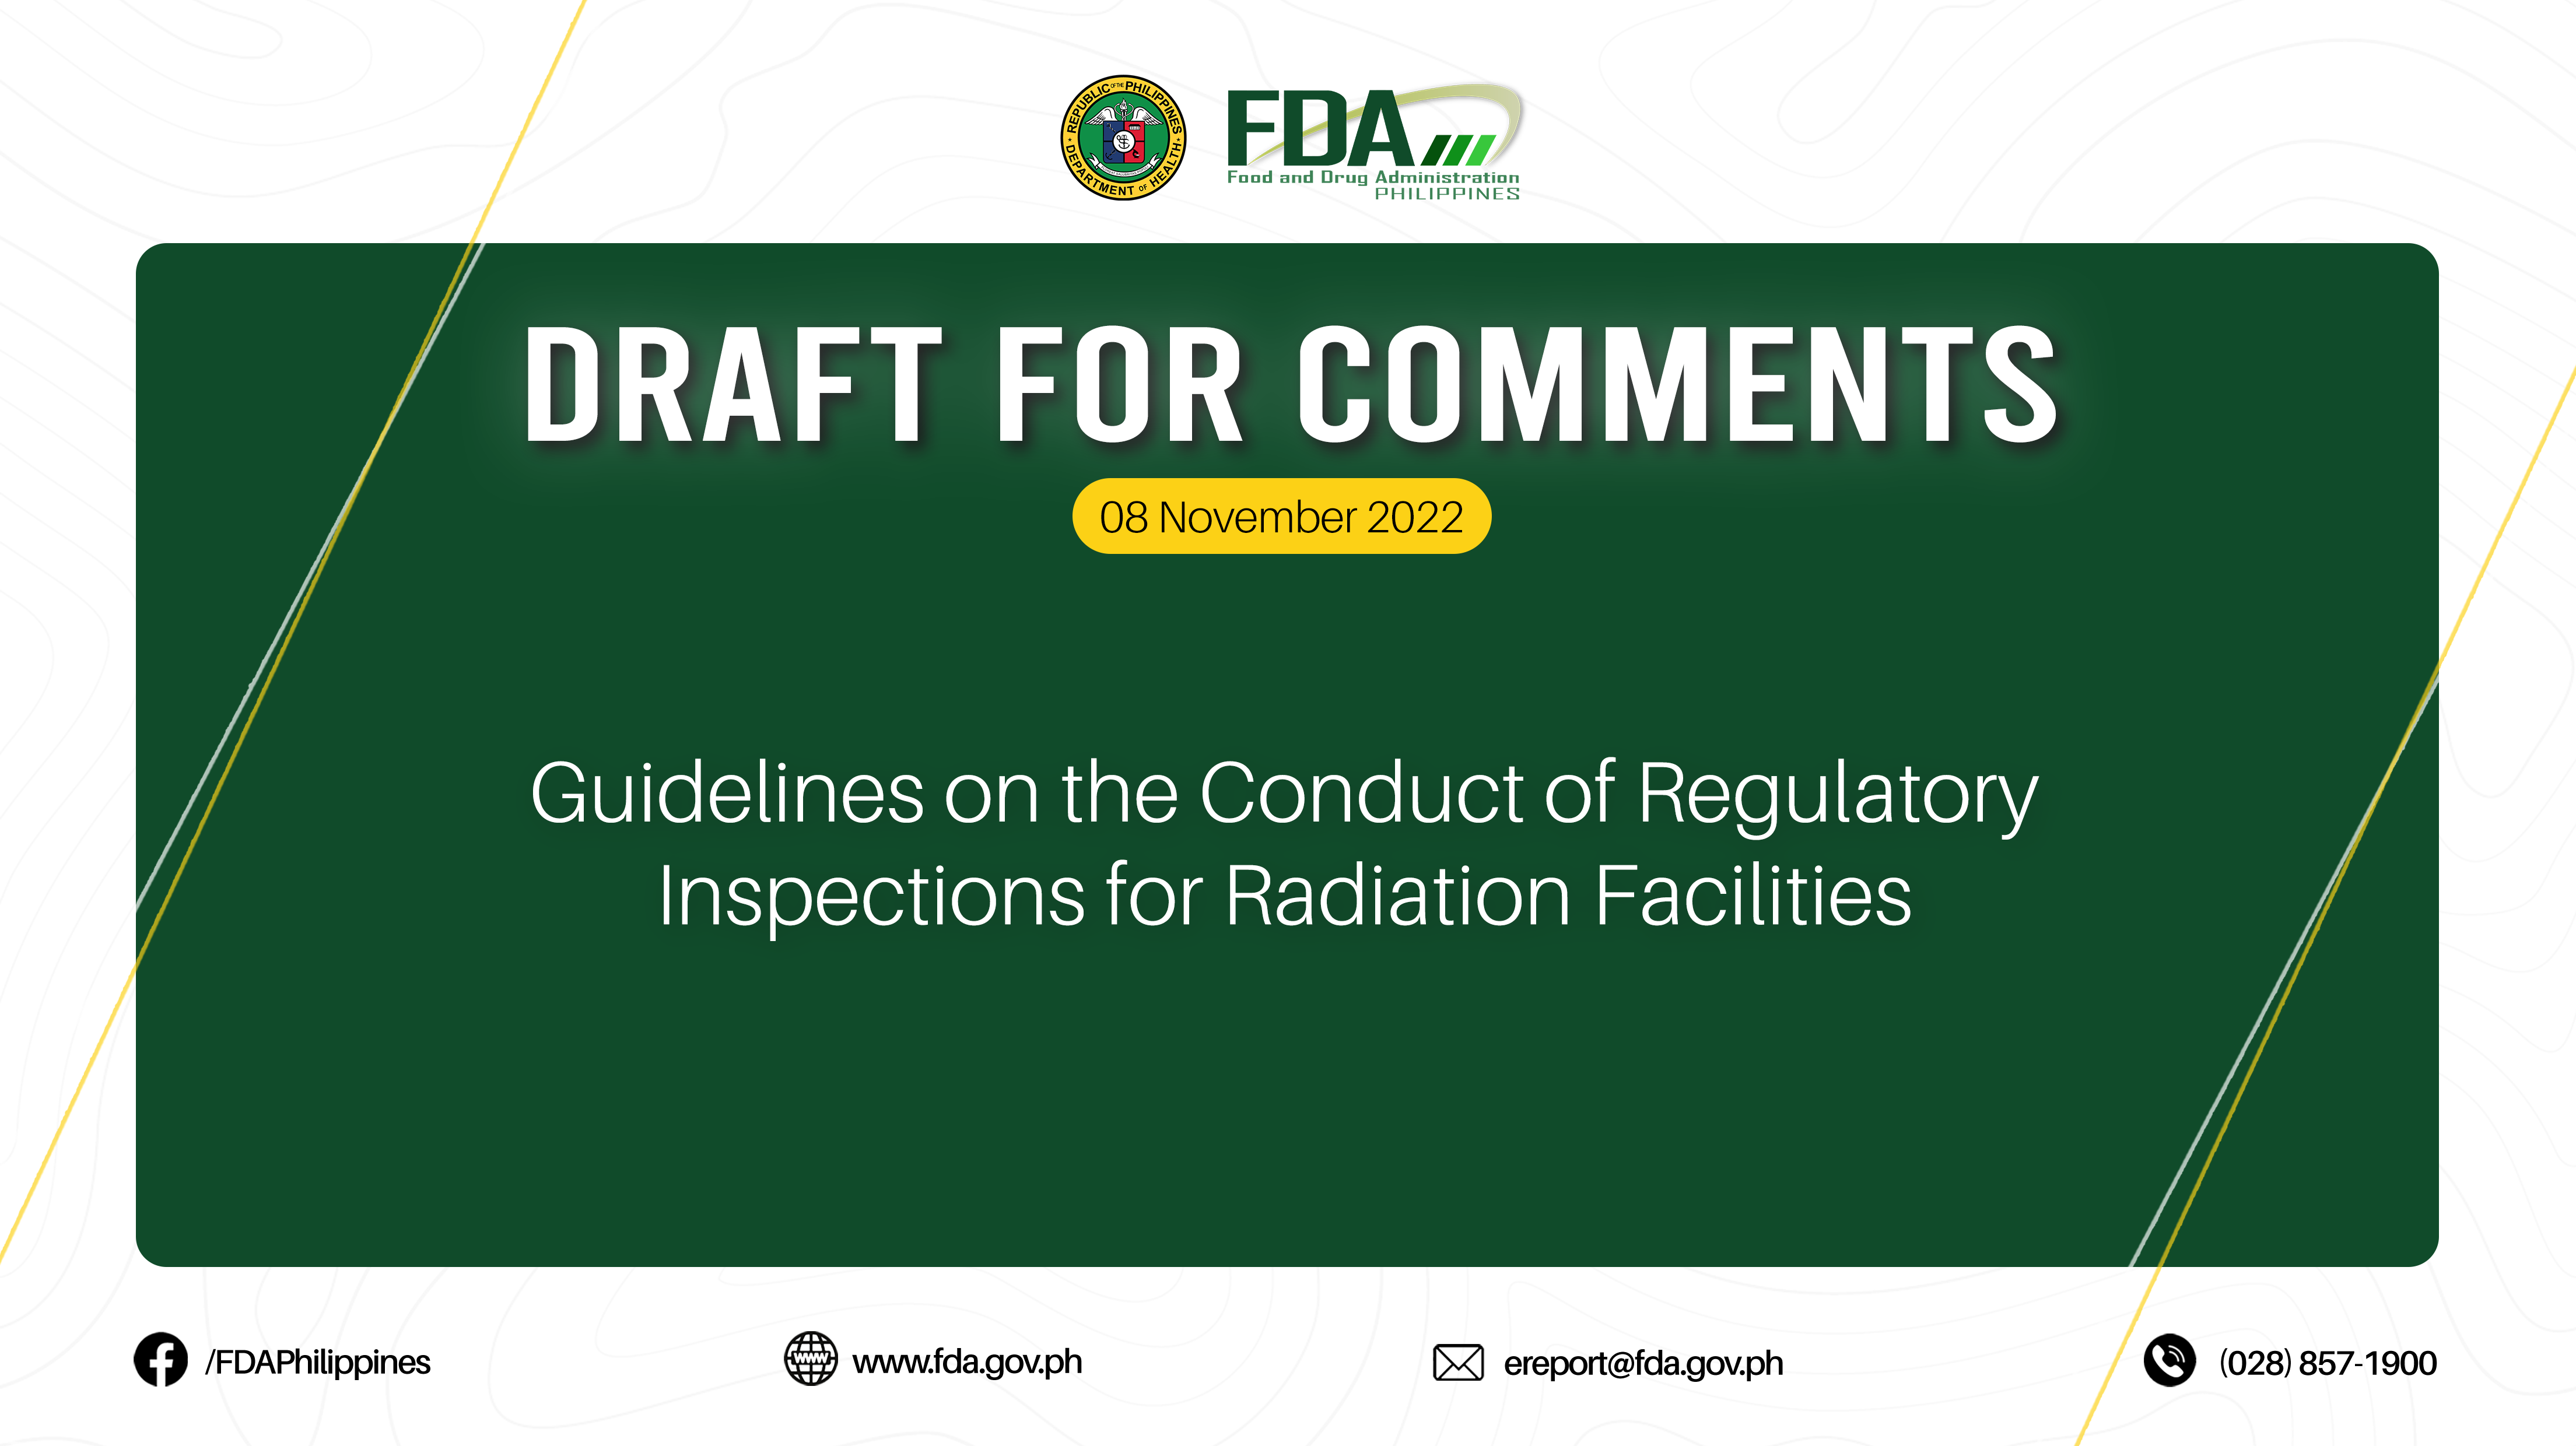 Draft for Comments || Guidelines on the Conduct of Regulatory Inspections for Radiation Facilities